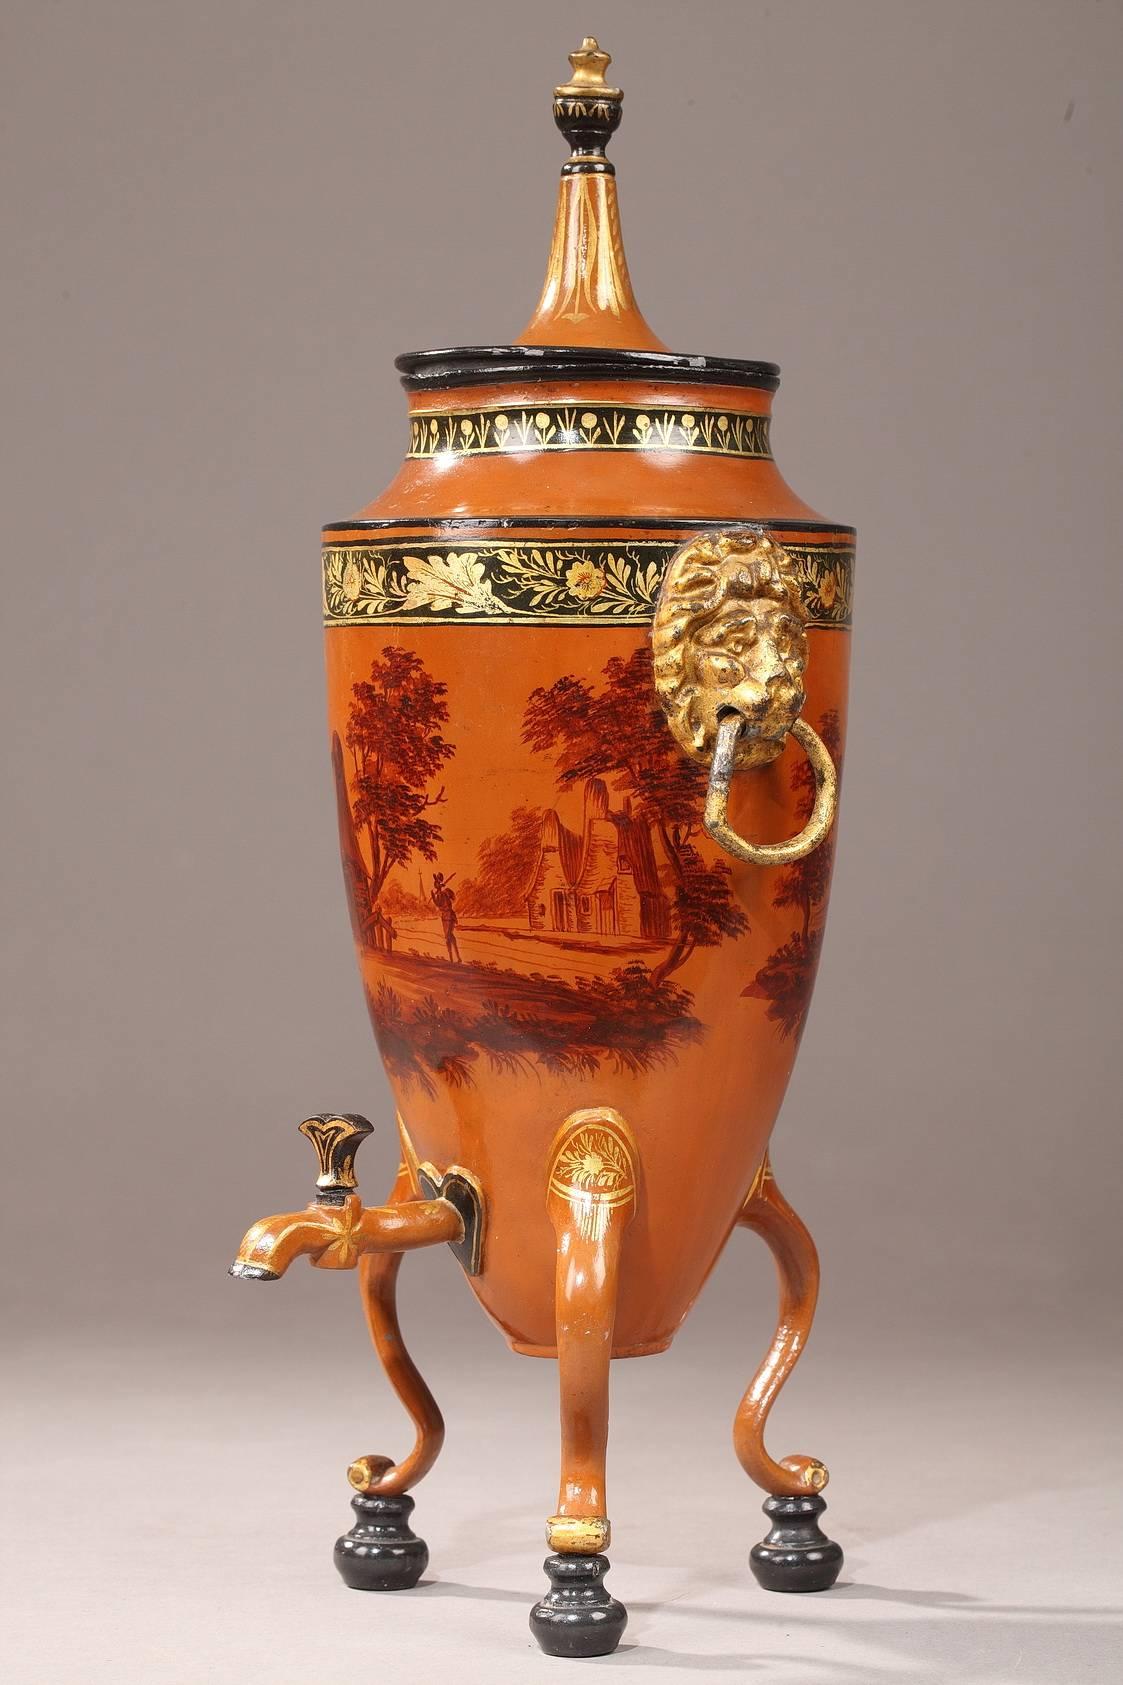 Pair of beverage dispensers in caramel-colored lacquered tin. They are decorated with monochrome village scenes and landscapes dotted with ruins. The upper part of the paunches and the necks are embellished with floral friezes painted with gold.